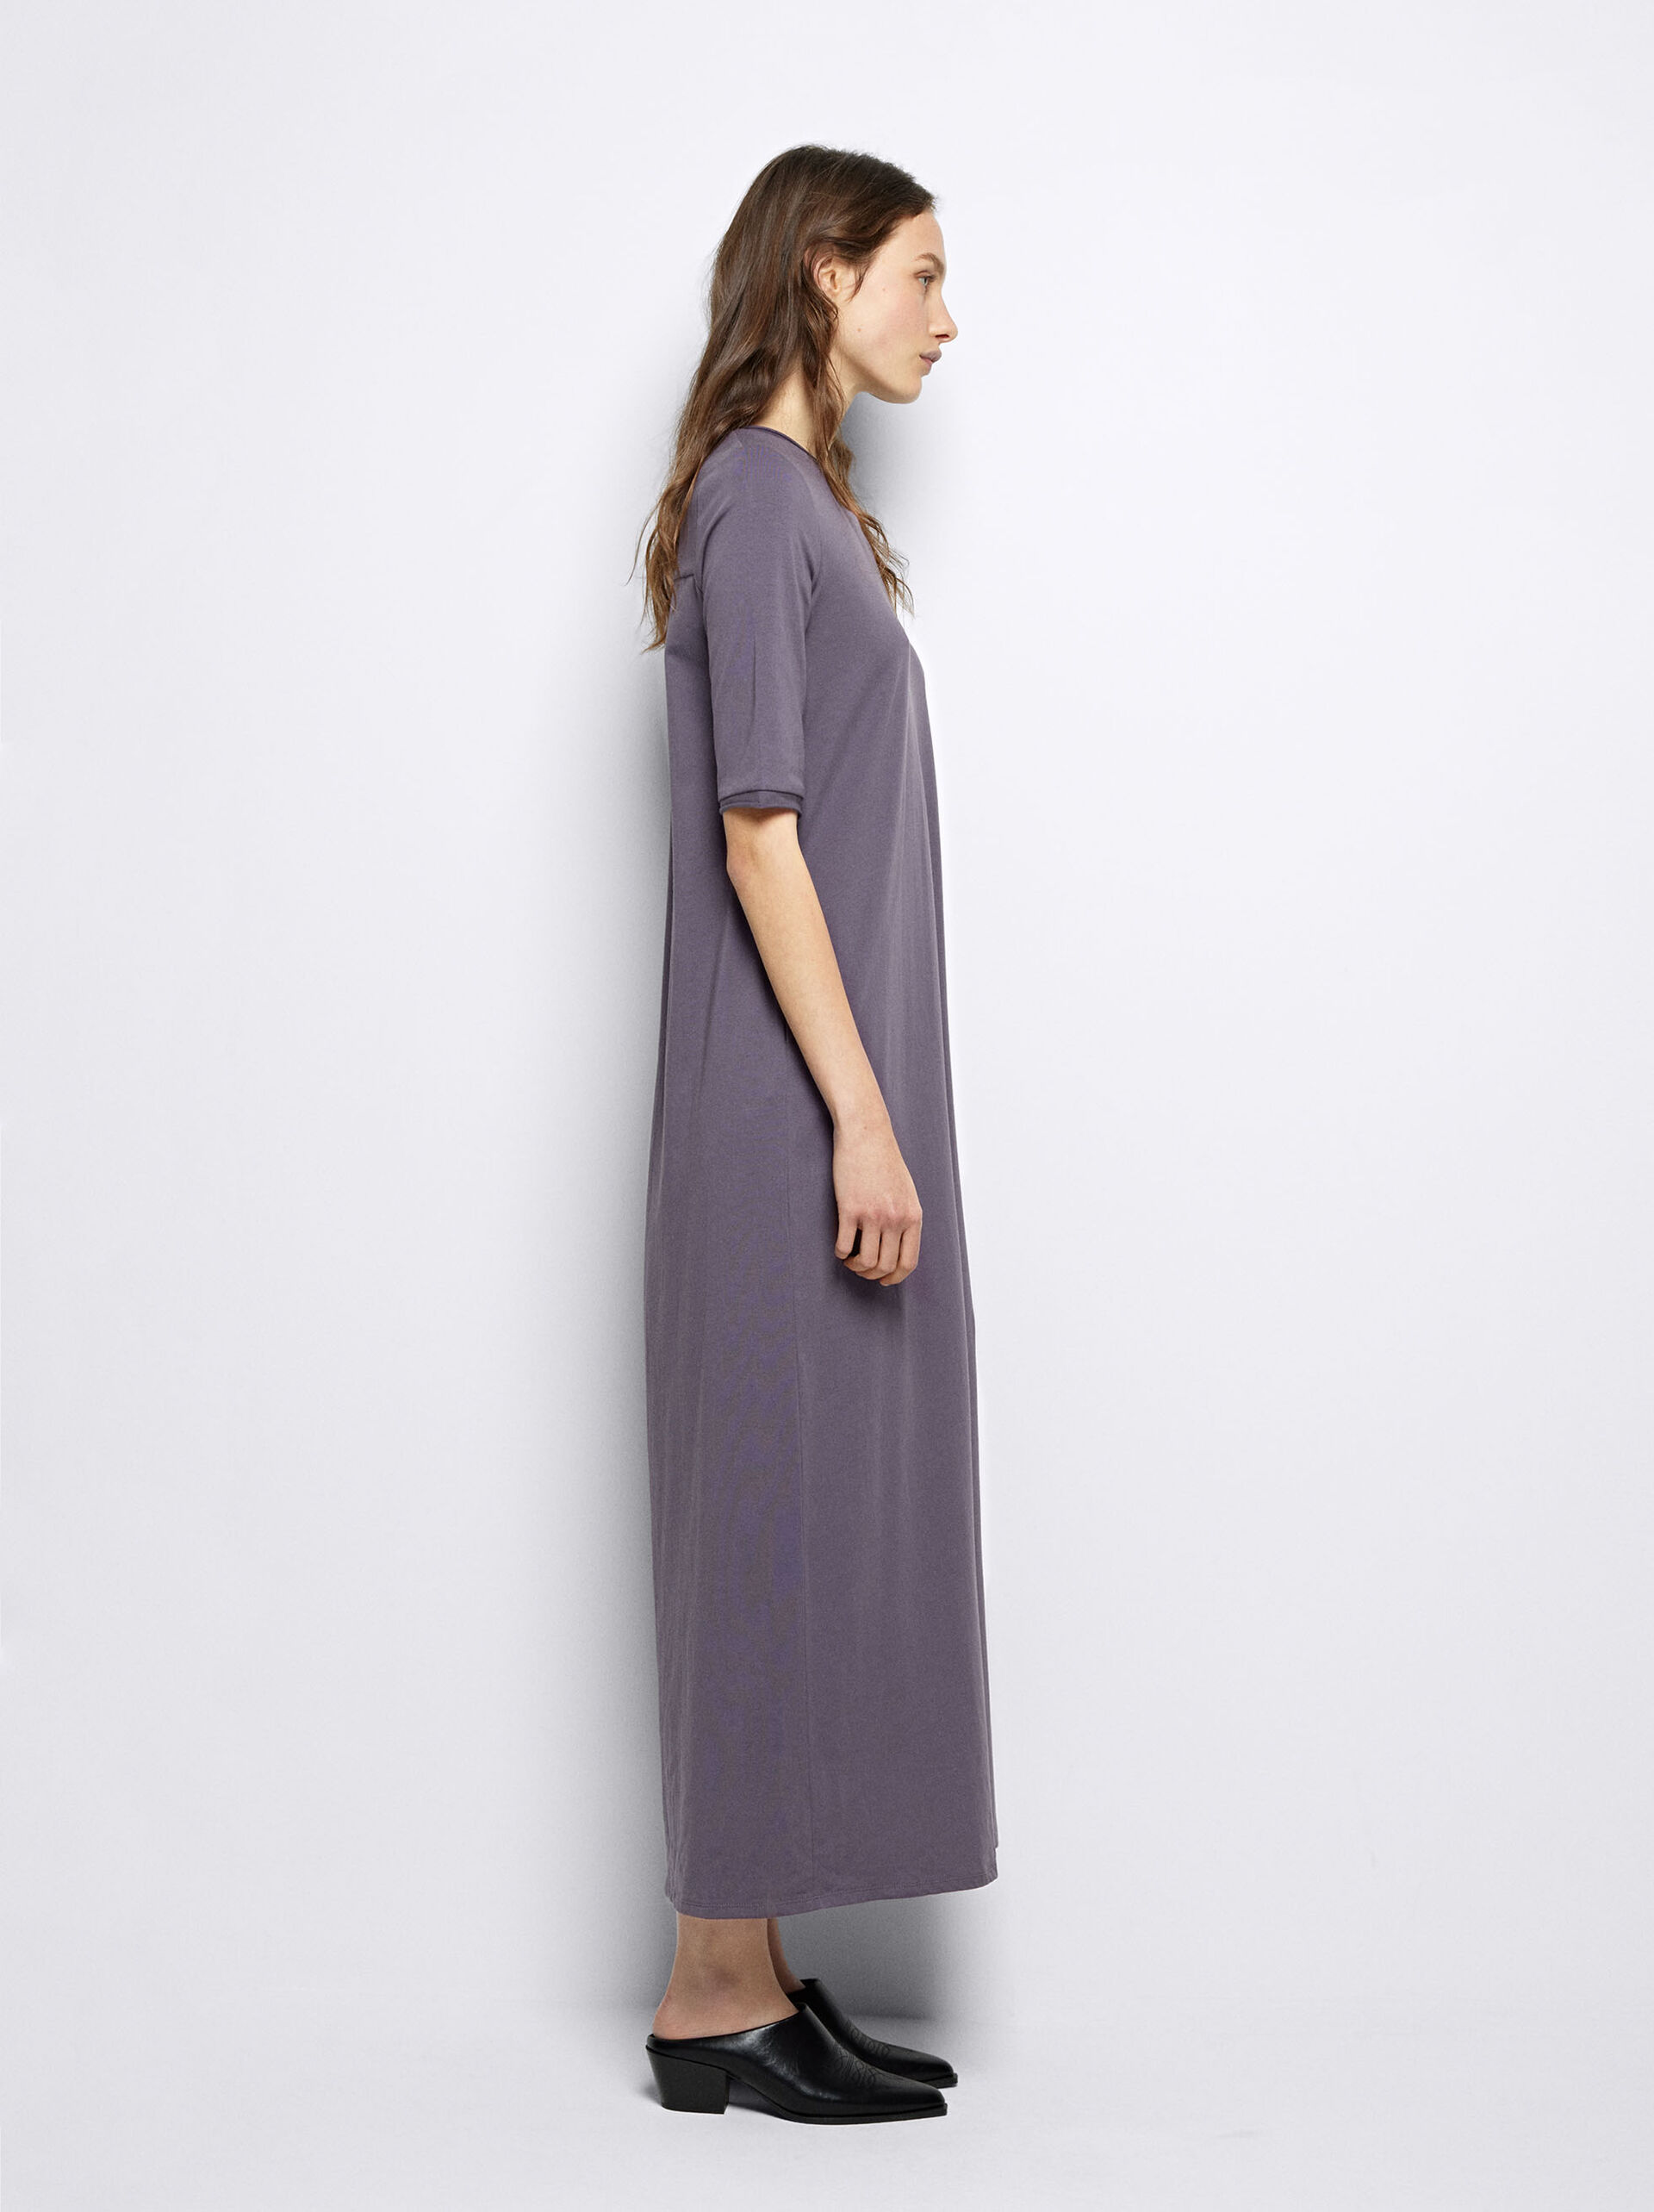 Flowy Cotton Dress image number 2.0